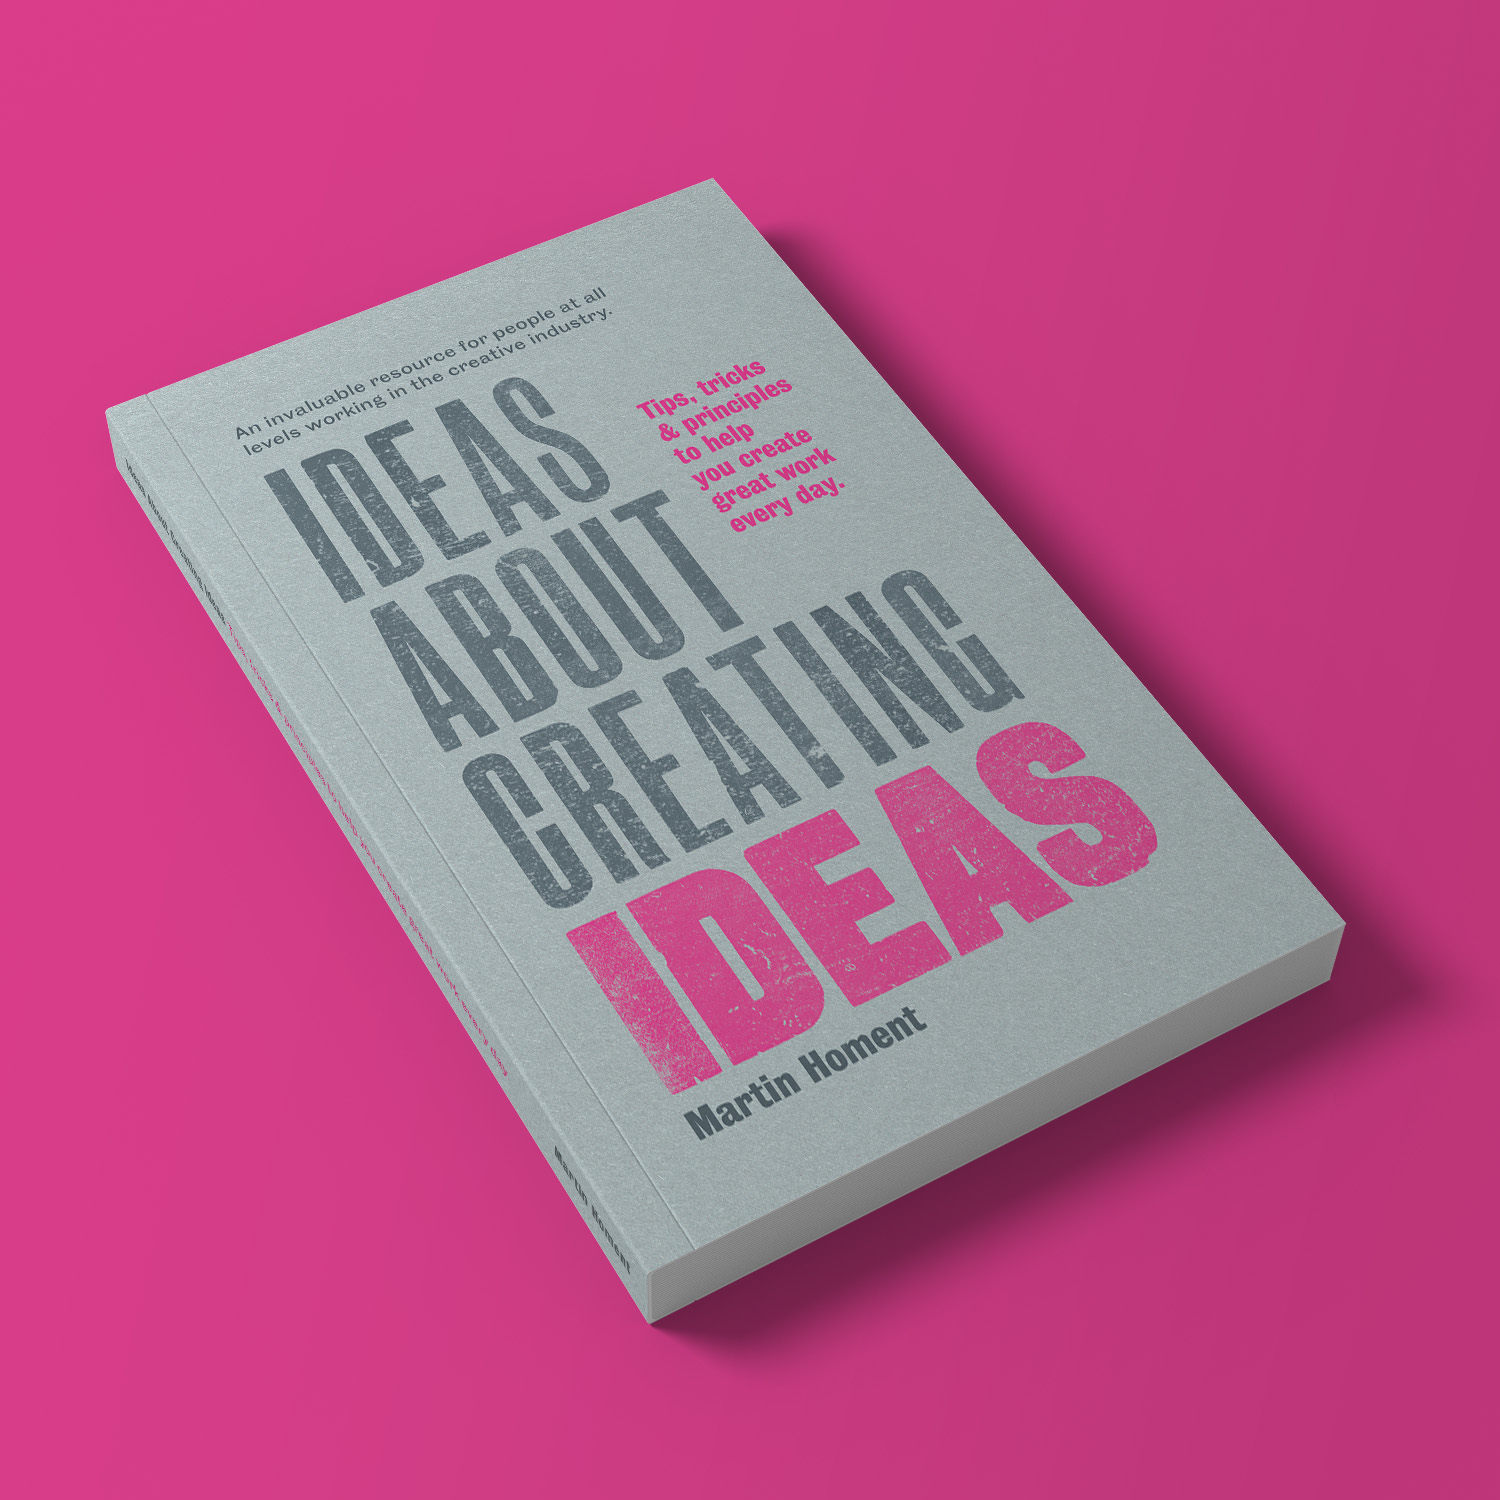 Buy my book: Ideas About Creating Ideas thumbnail